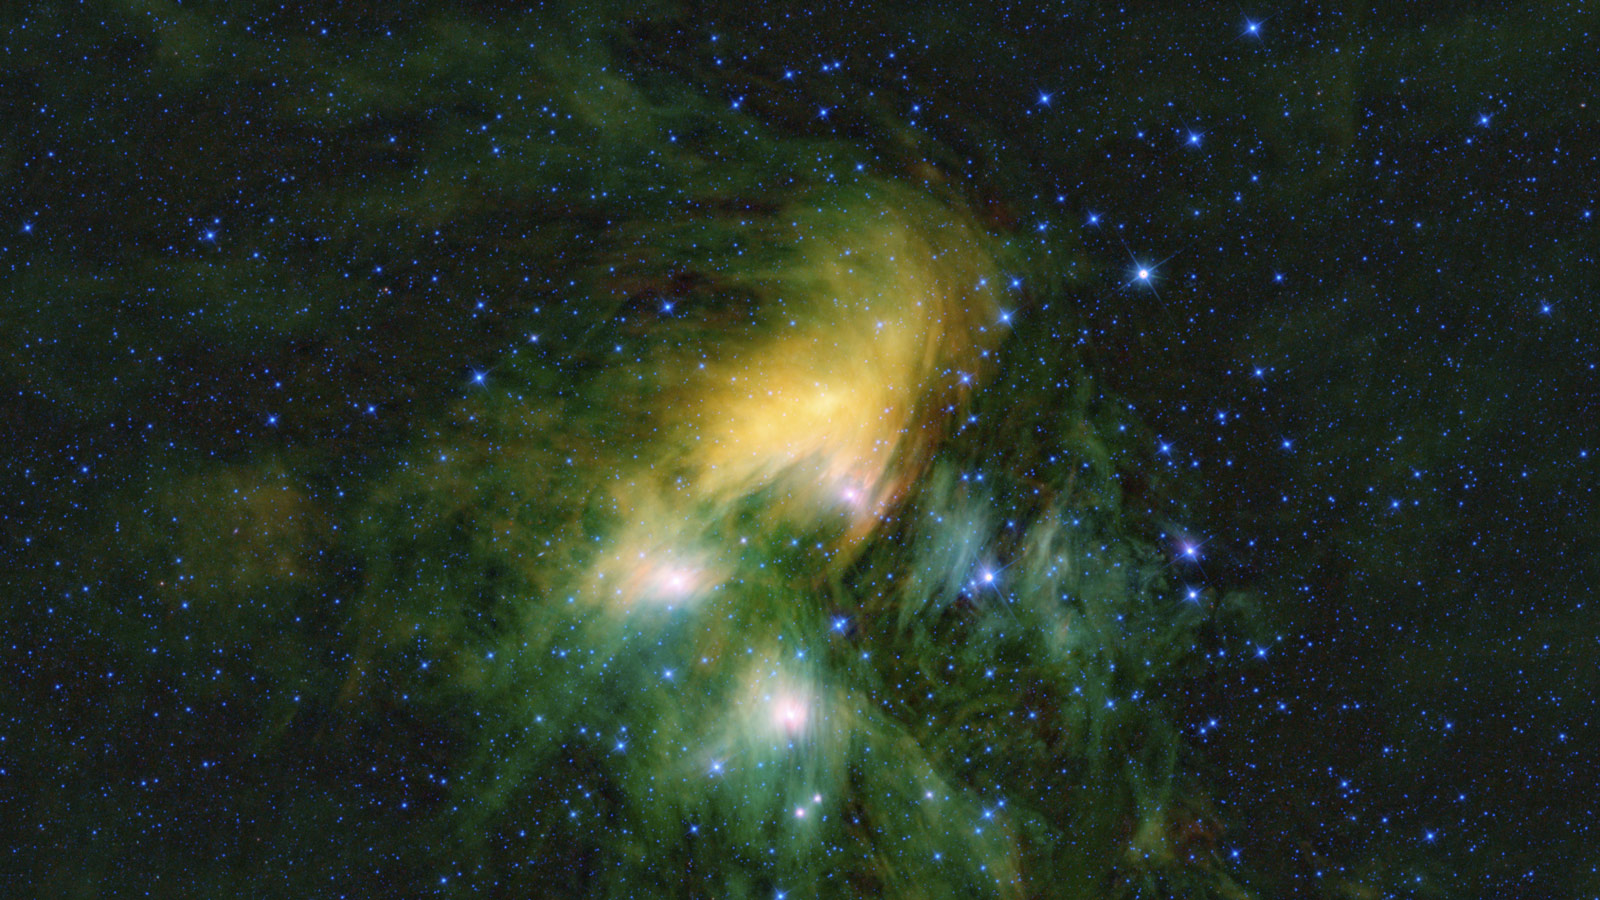 This image shows the famous Pleiades cluster of stars as seen through the eyes of WISE, or NASA's Wide-field Infrared Survey Explorer.Image credit: NASA/JPL-Caltech/UCLA